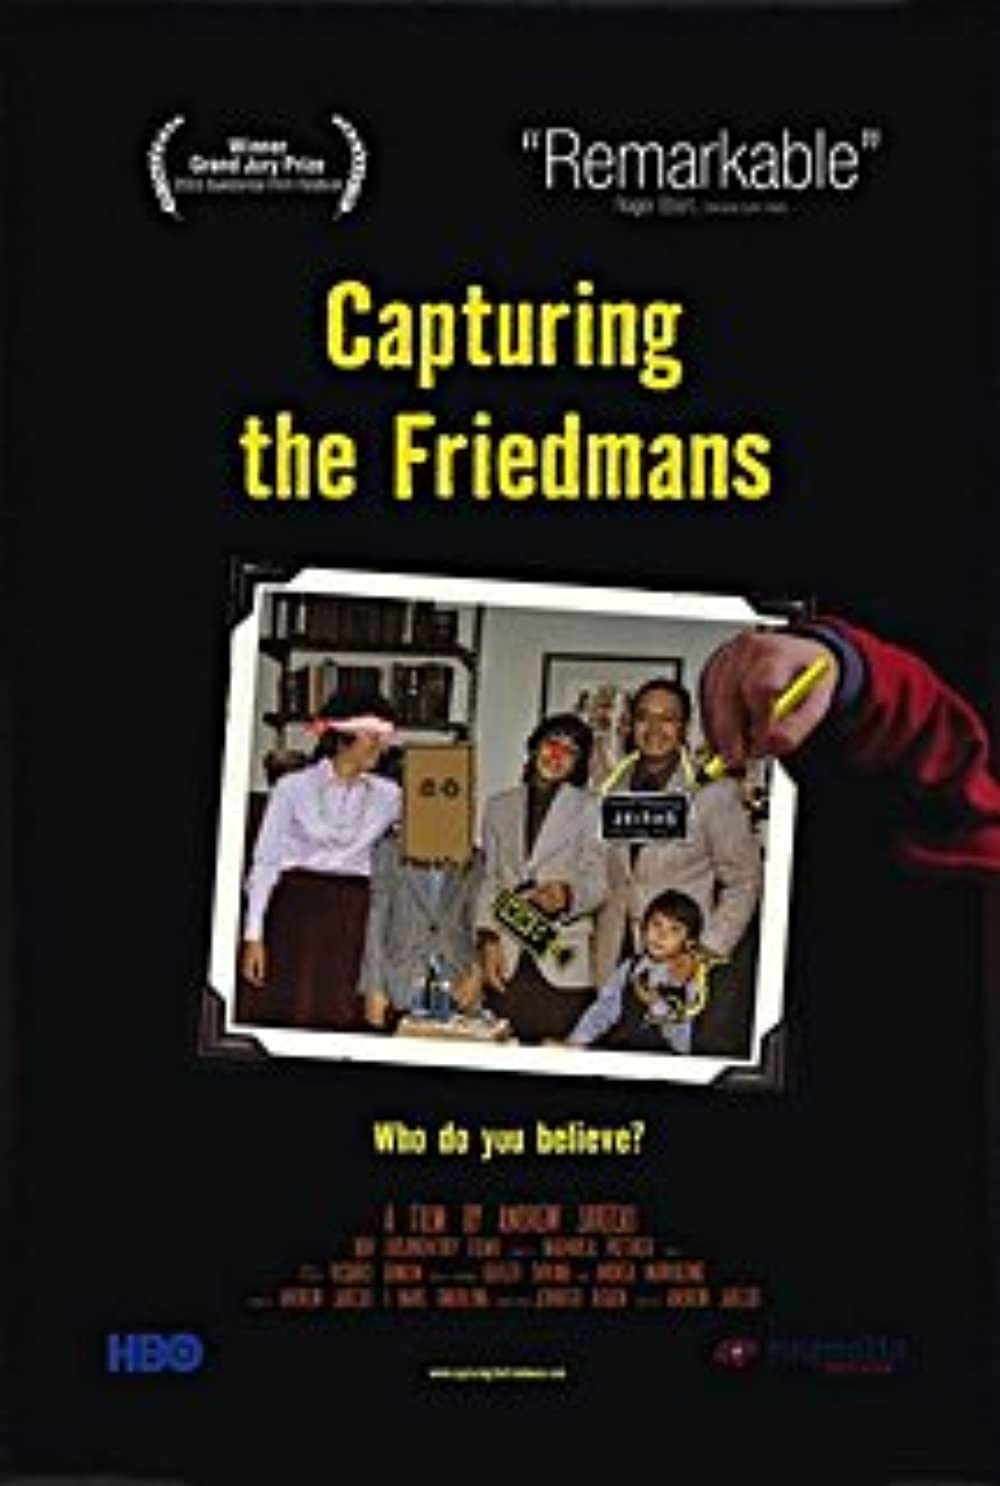 Capturing the Friedmans is a 2003 HBO documentary film directed by Andrew Jarecki. It focuses on the 1980s investigation of Arnold and Jesse Friedman for child molestation. It was nominated for the Academy Award for Best Documentary Feature in 2003.